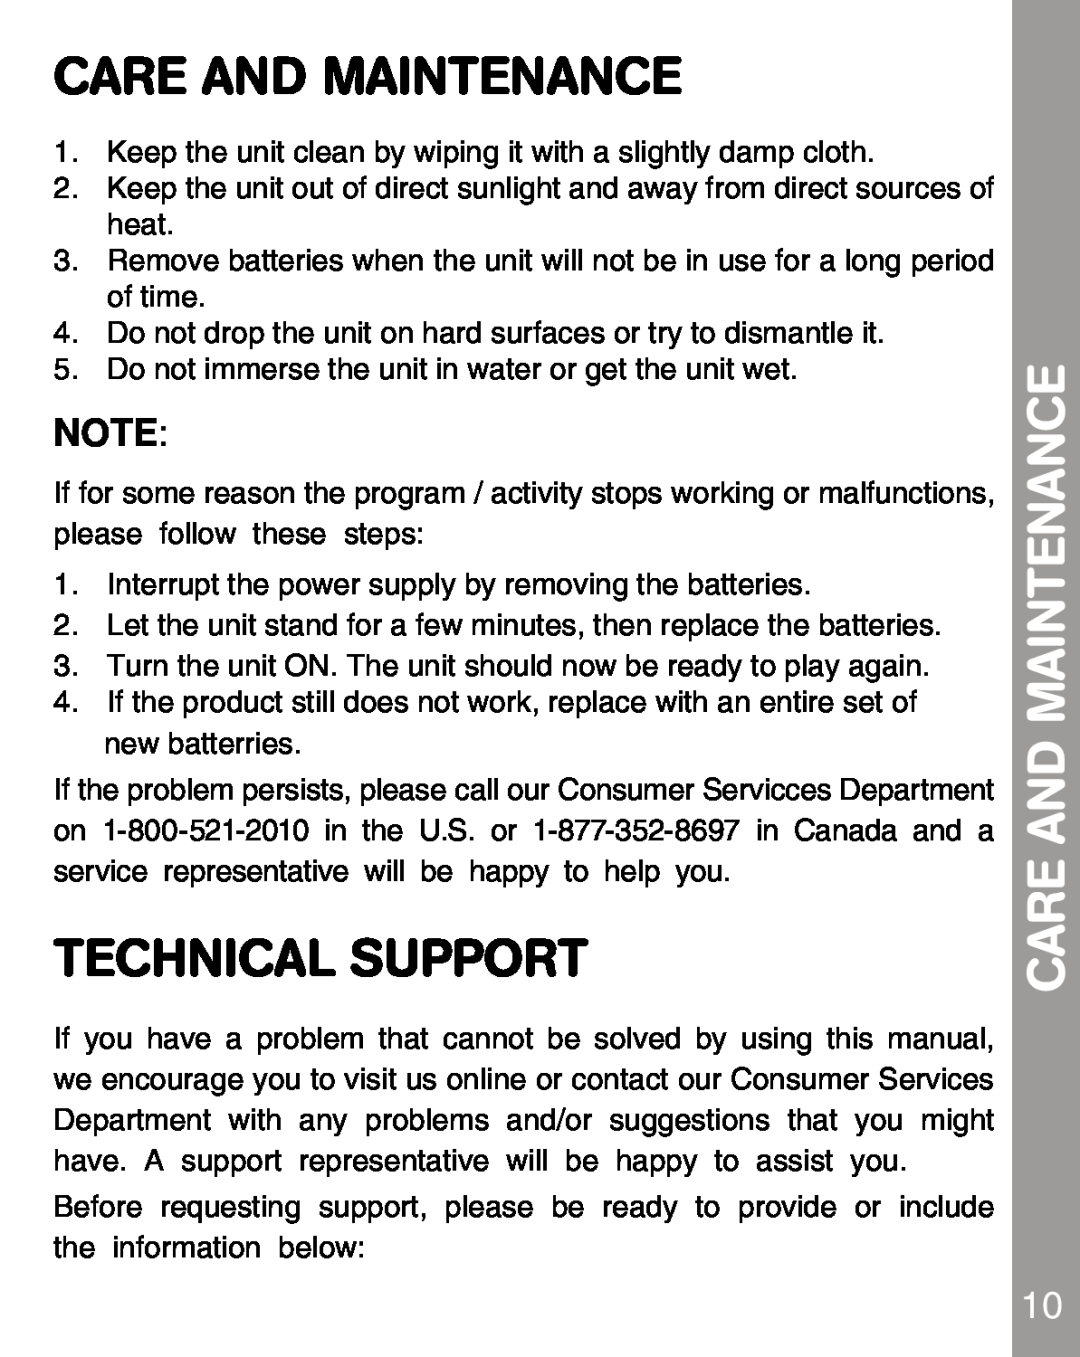 VTech 80-067848 user manual Care And Maintenance, Technical Support 